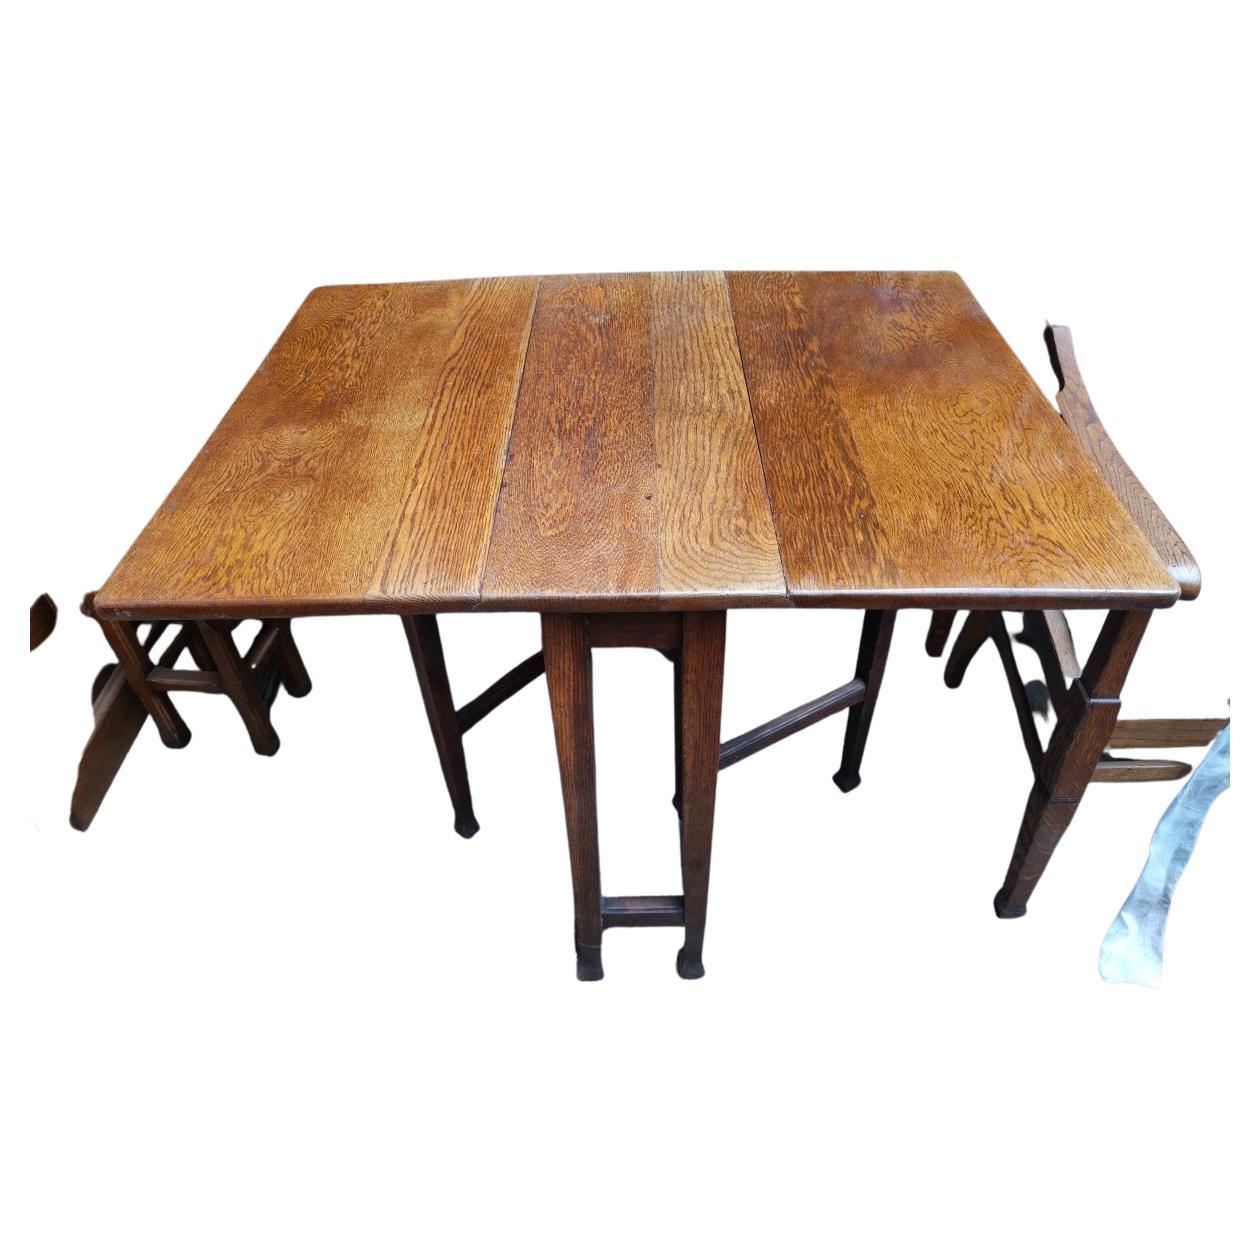 A good quality English Arts & Crafts oak drop leaf dining or Pembroke table with wild-figured grain to the top and square tapering legs. Very sturdy.
When closed it will store away in a small space, and takes up very little room.
Measures: Height